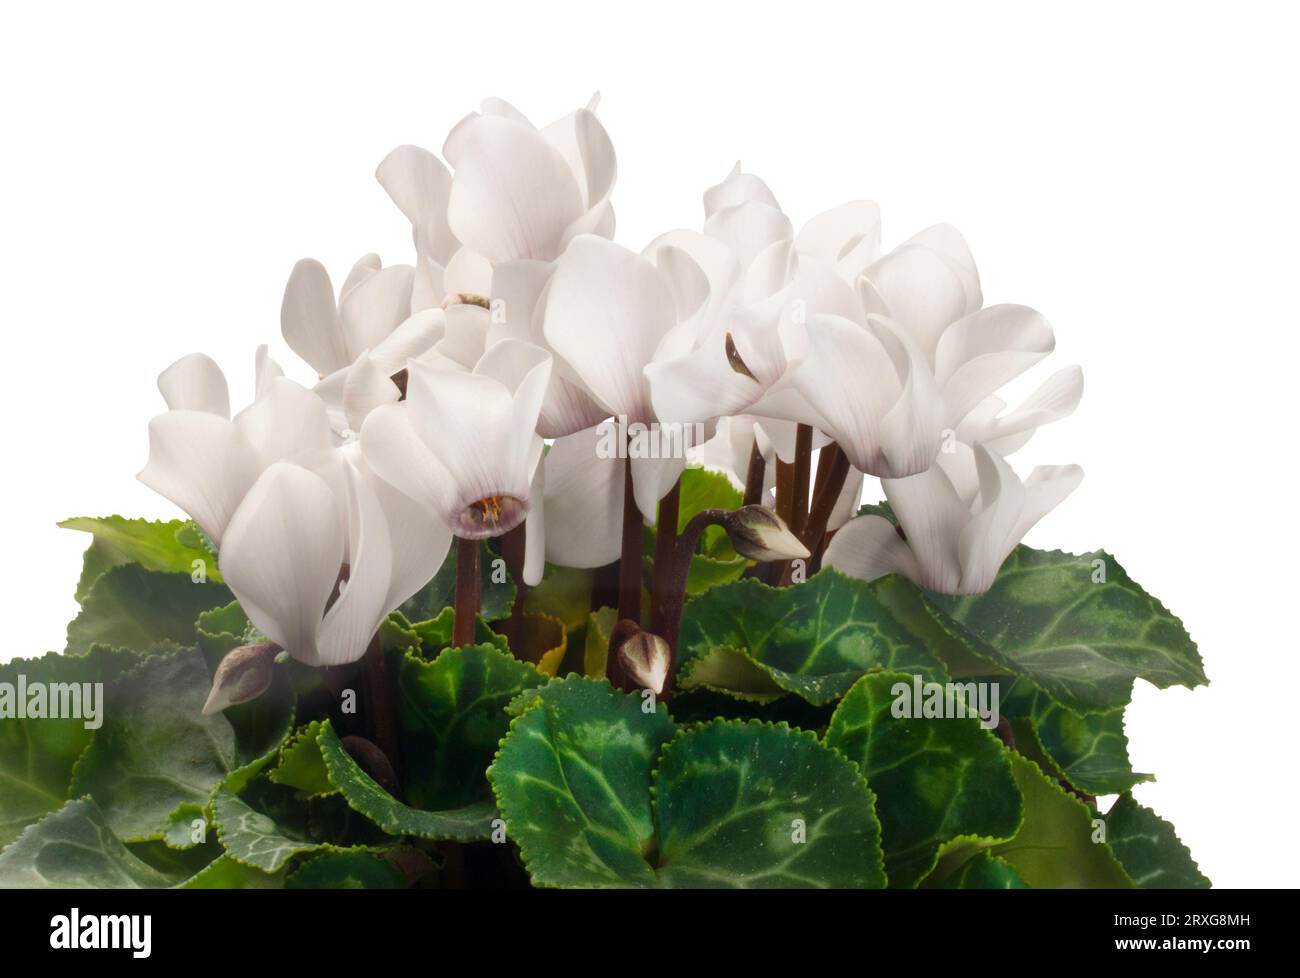 Studio shot of potted white cyclamen cut out against a white background - John Gollop Stock Photo